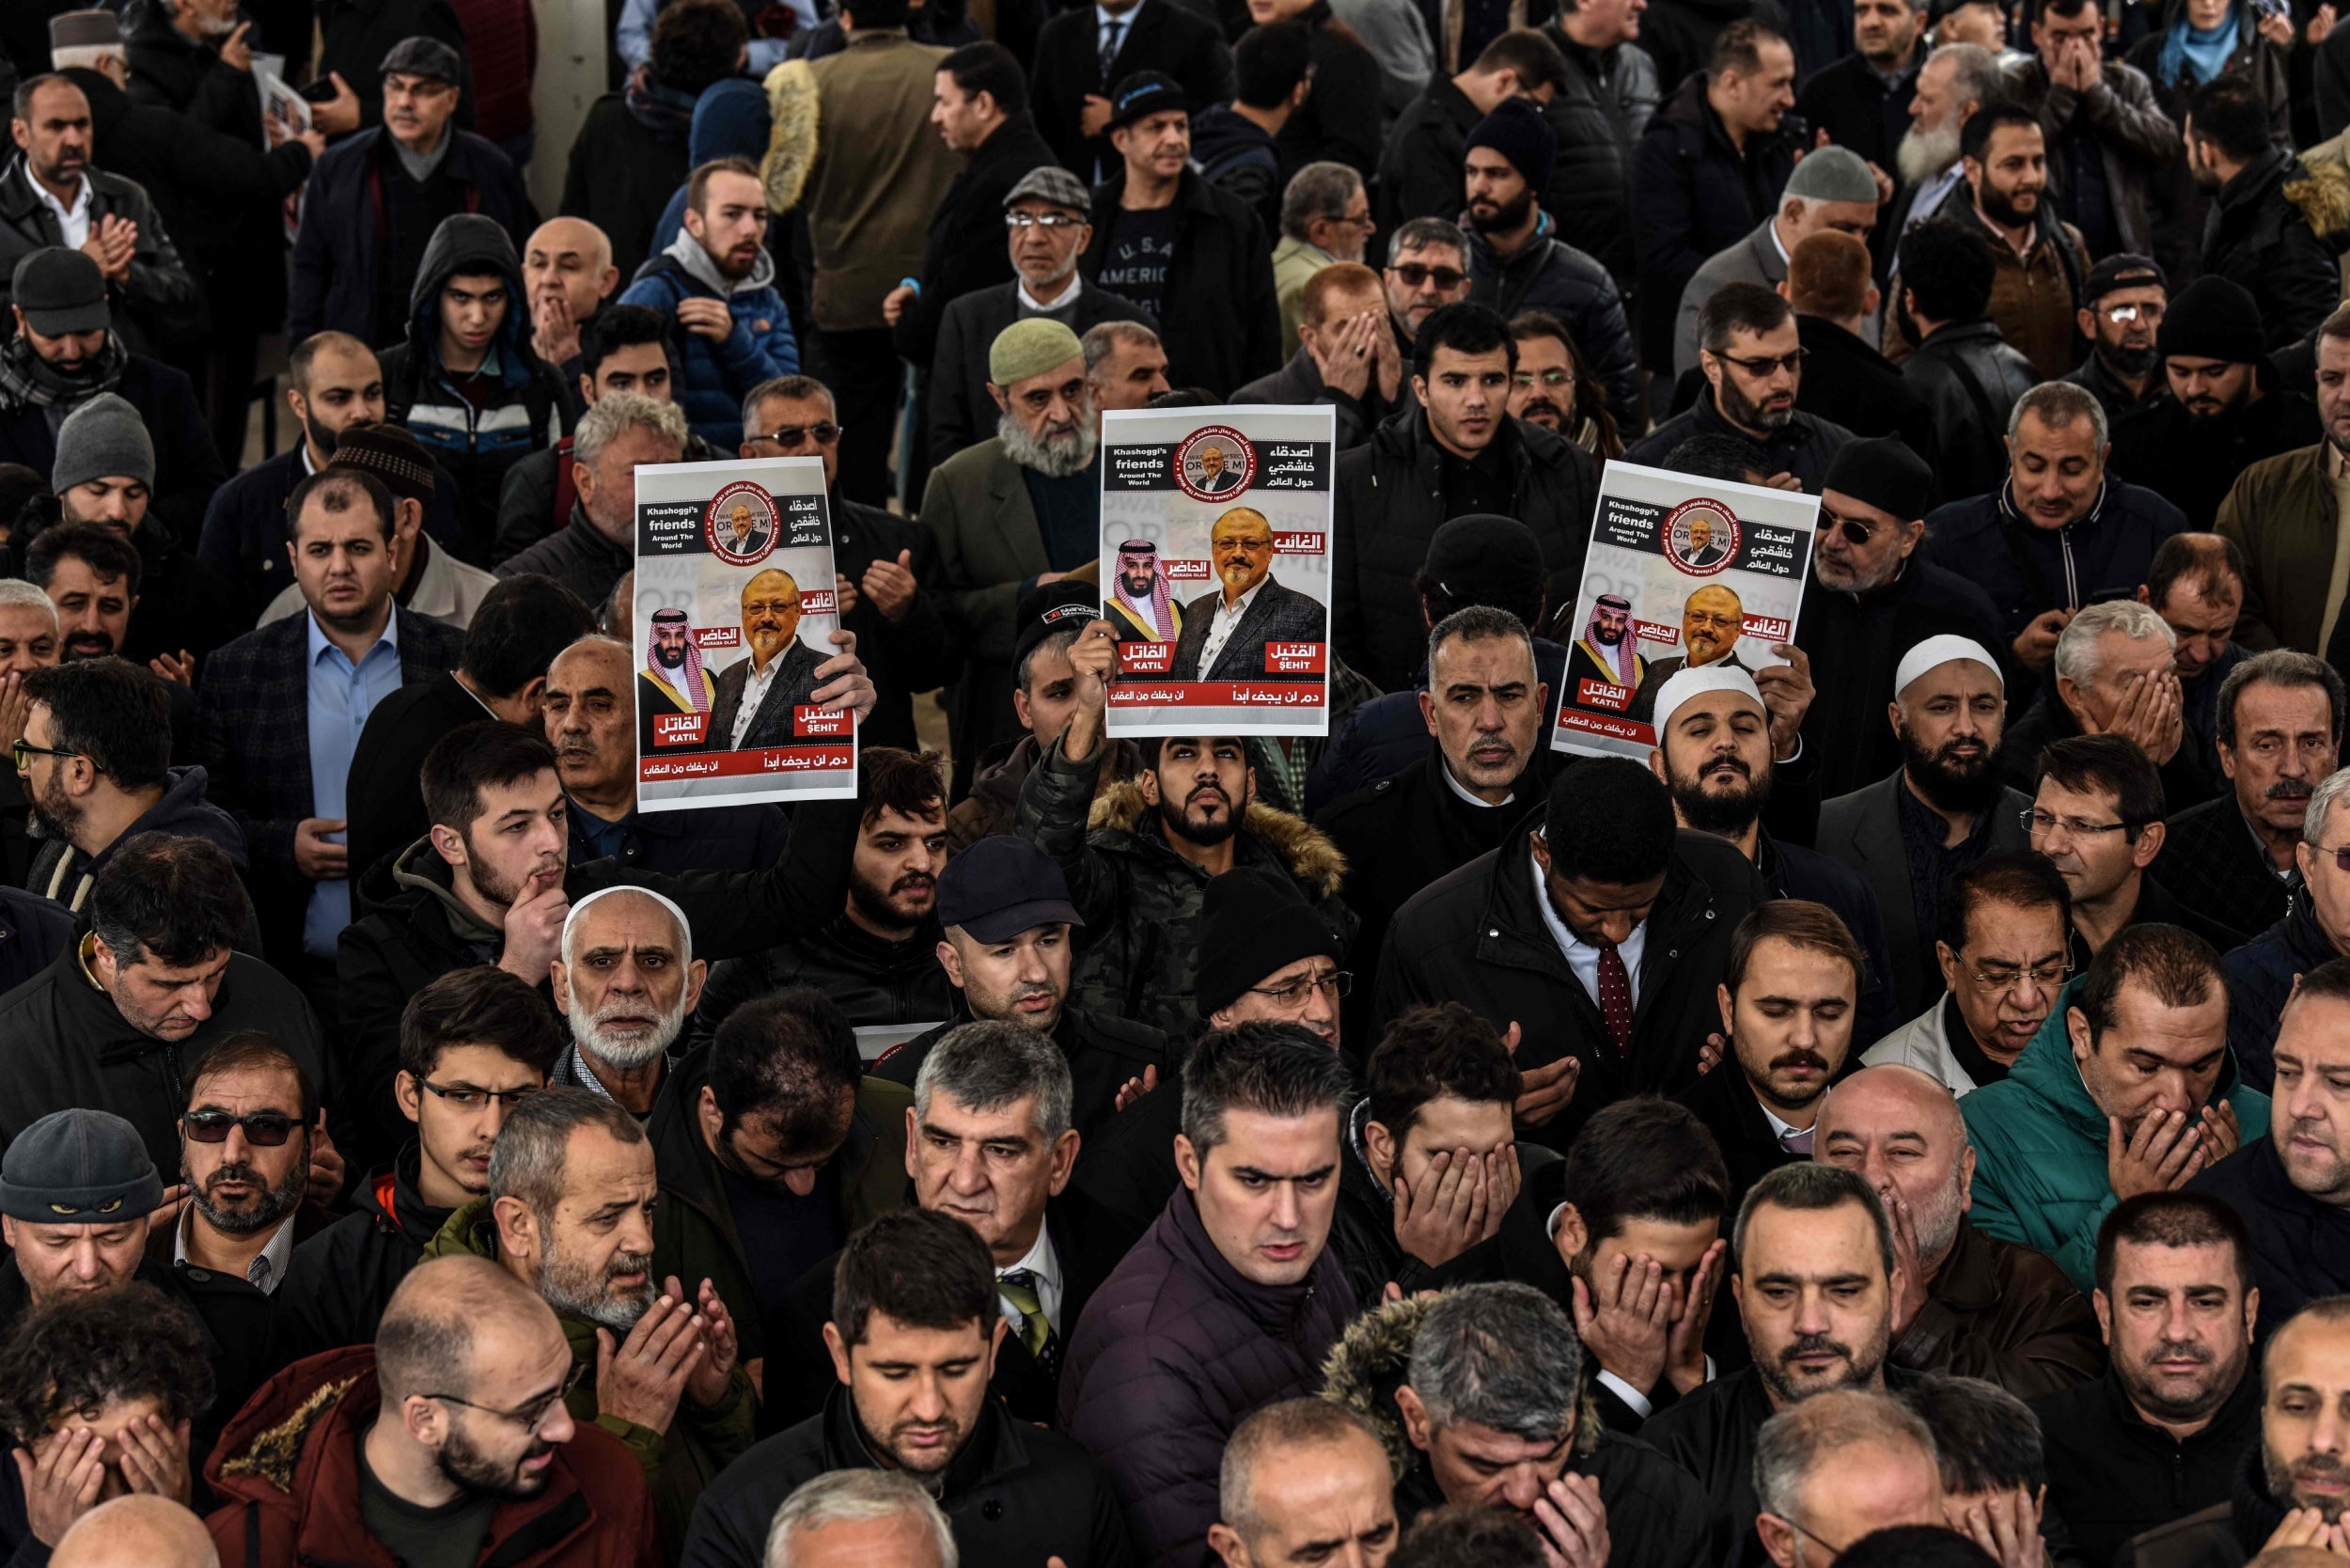 Mourners hold up posters at a funeral for murdered journalist Jamal Khashoggi in Istanbul